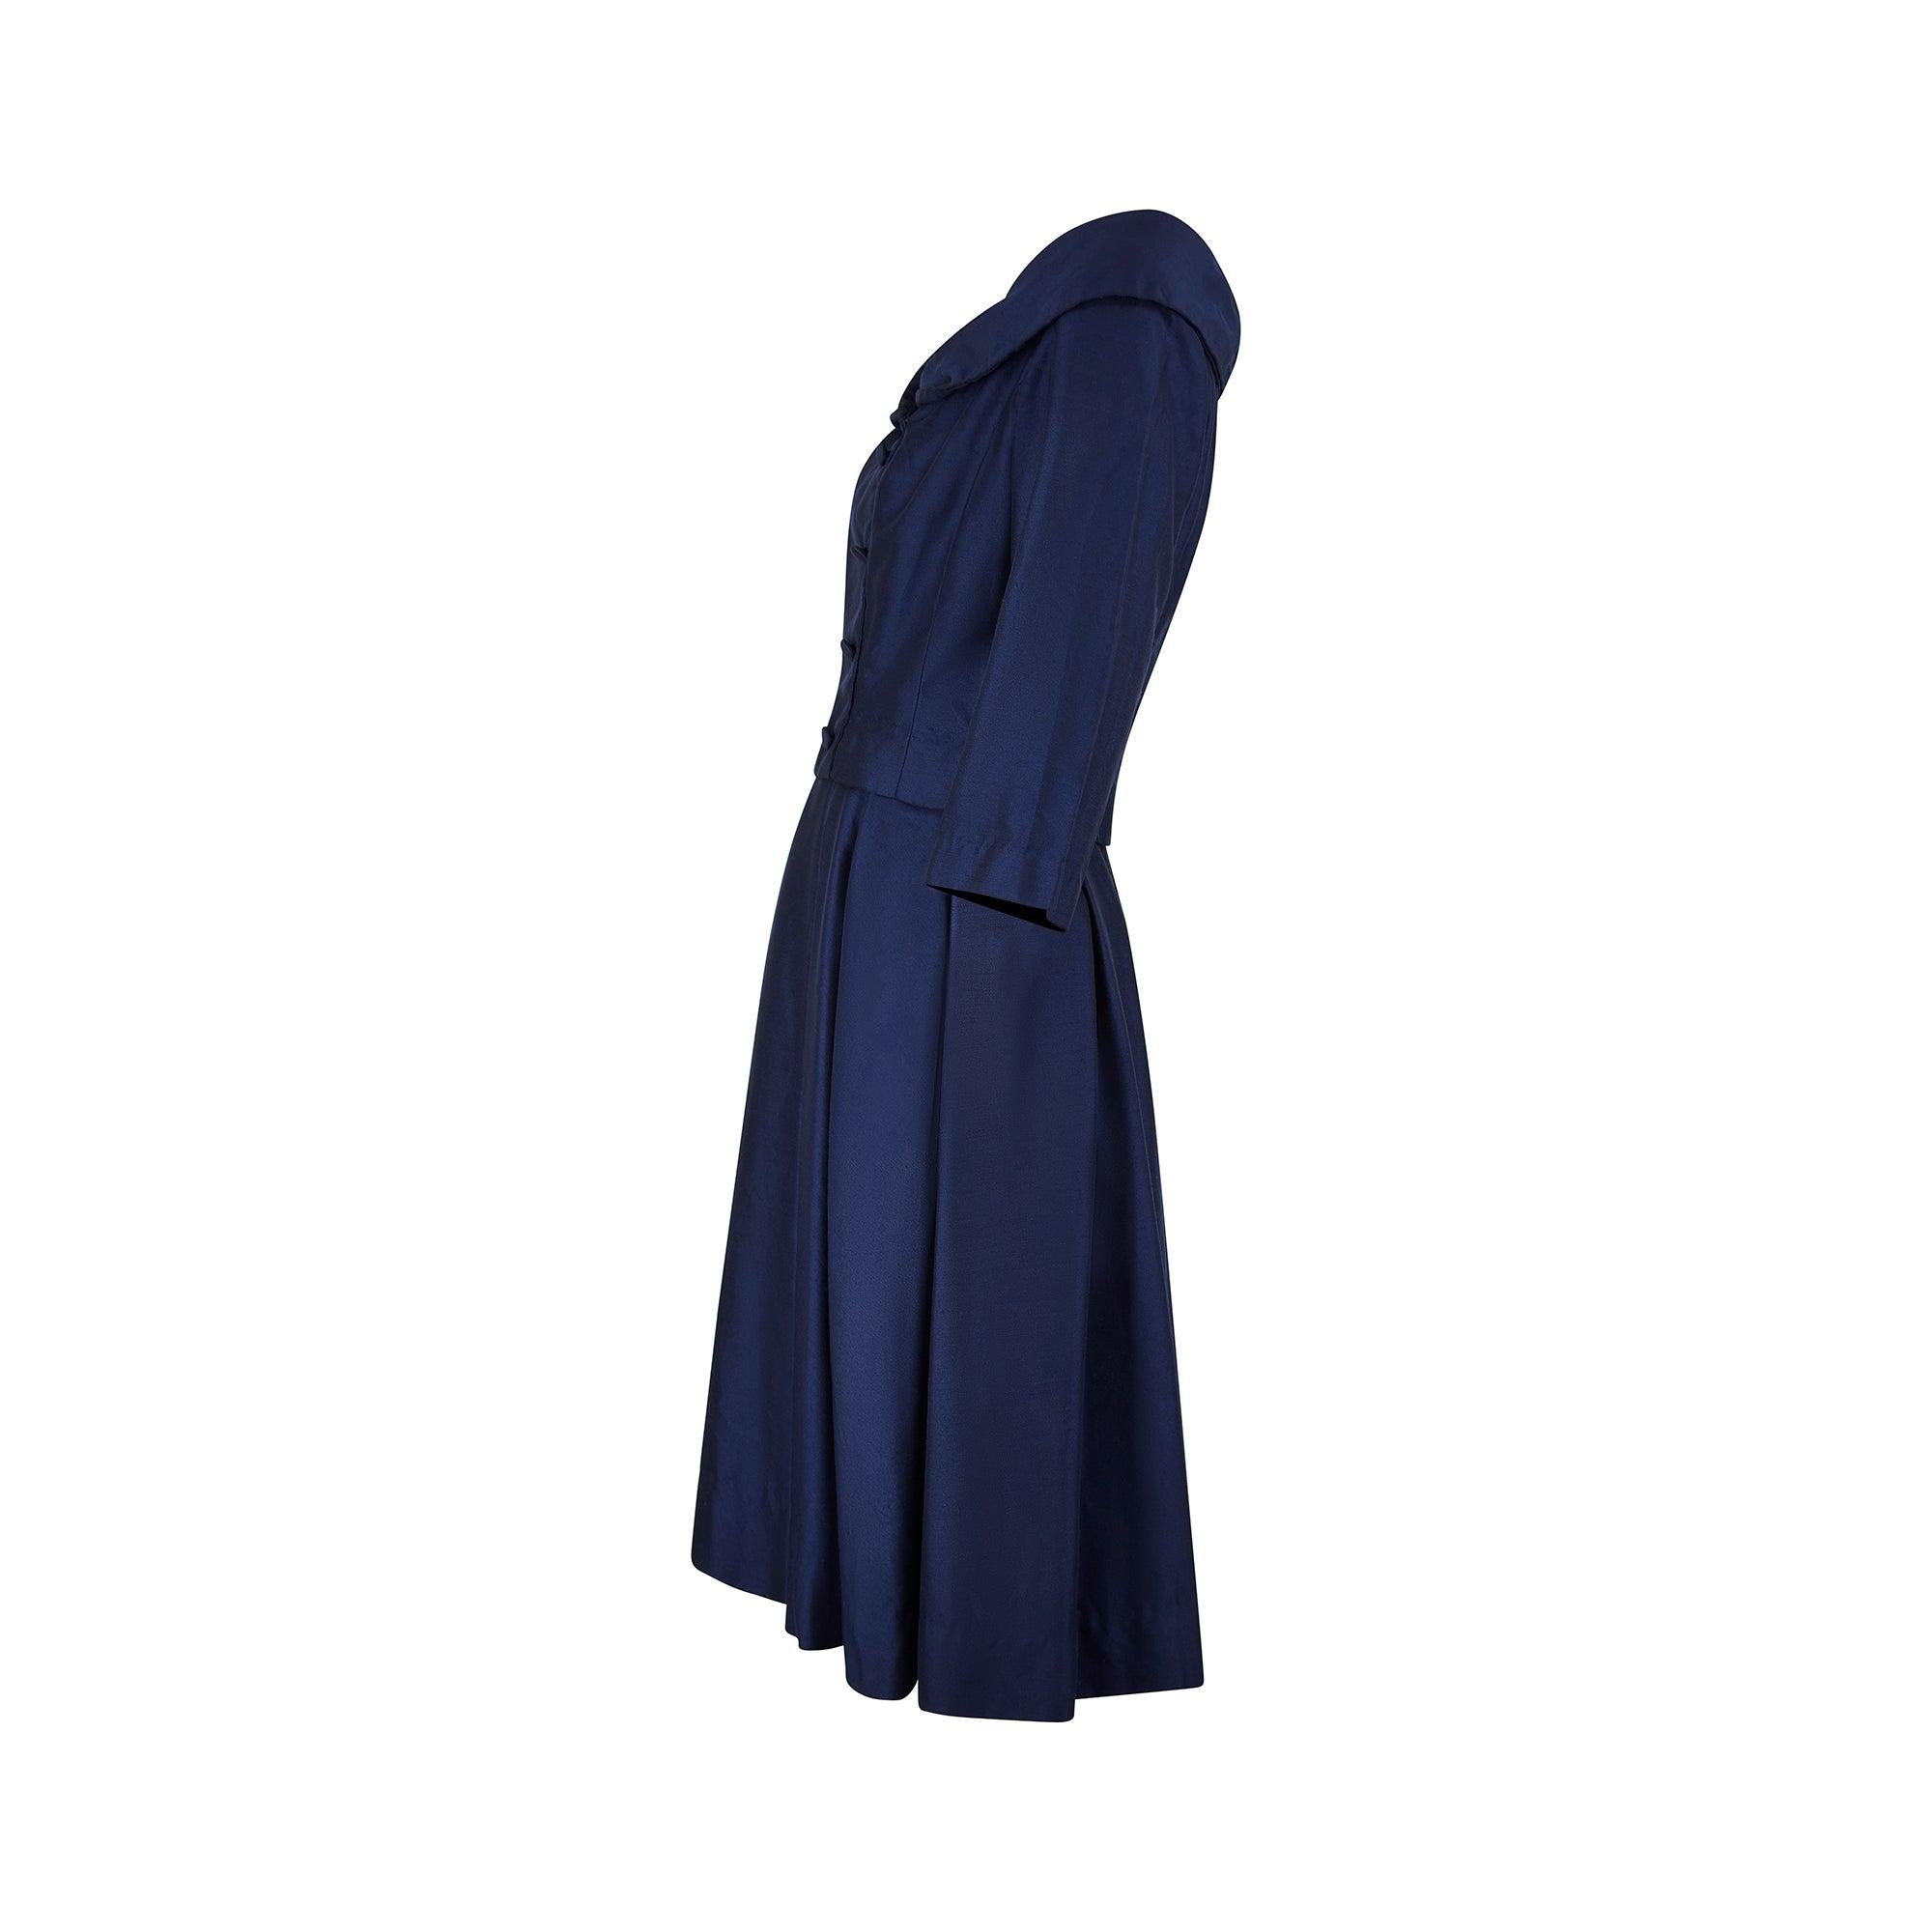 This dress is the epitome of elegance. Designed for iconic London department store Harrods in the late 1950s, it gives the illusion of a two-piece suit made up of a double-breasted jacket and skirt but is, in fact, a midi-dress. The wide neckline